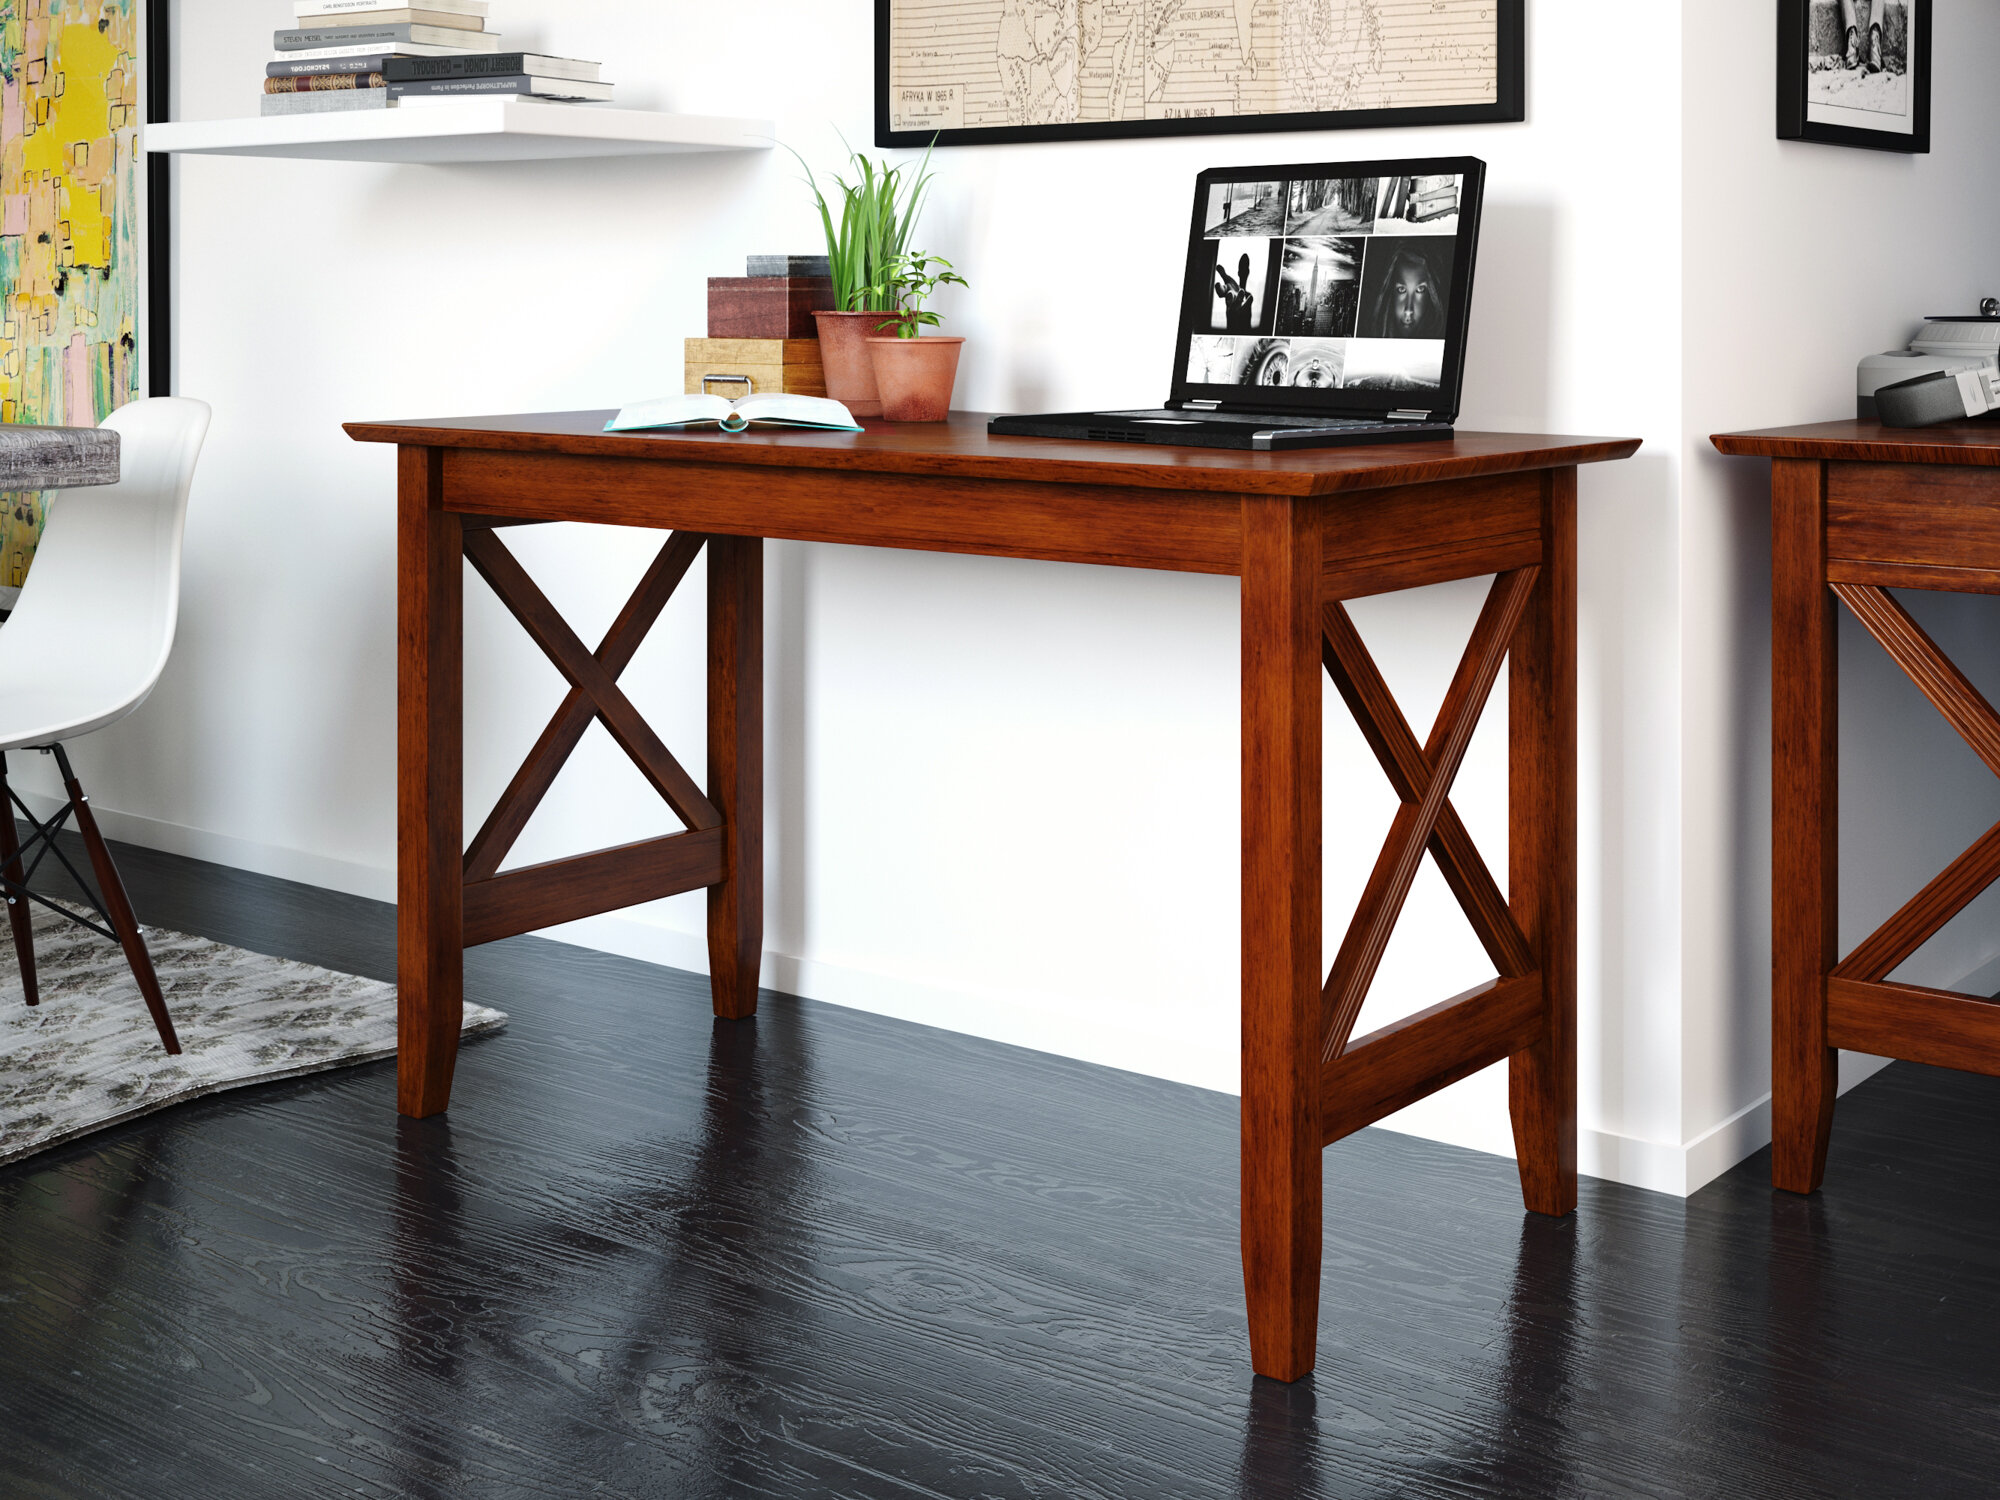 Shop Tabitha Solid Wood Desk with 1 Drawer and turned legs Natural, Desks